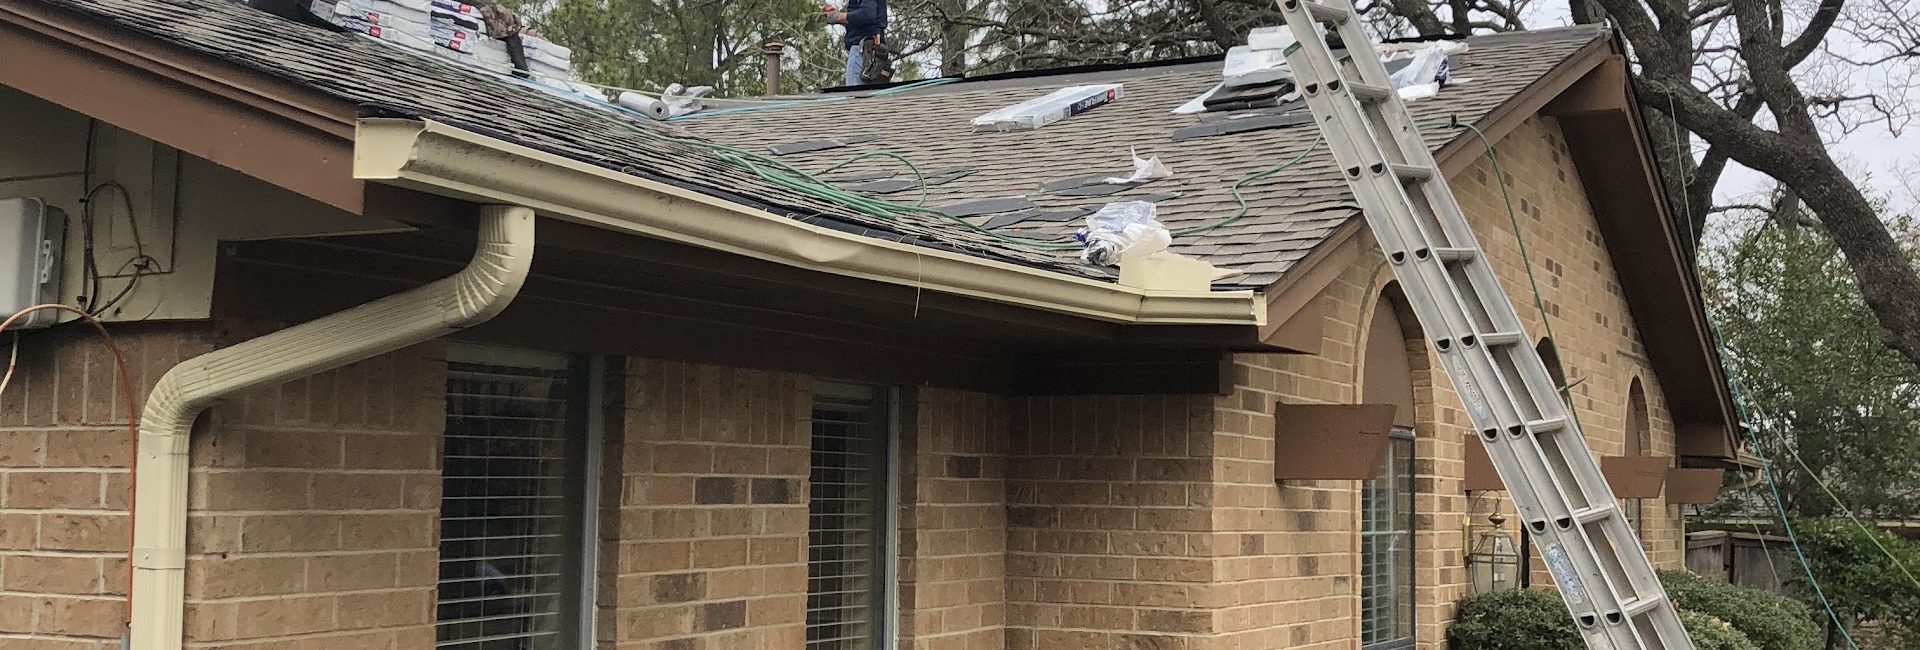 North Texas Roofing 5